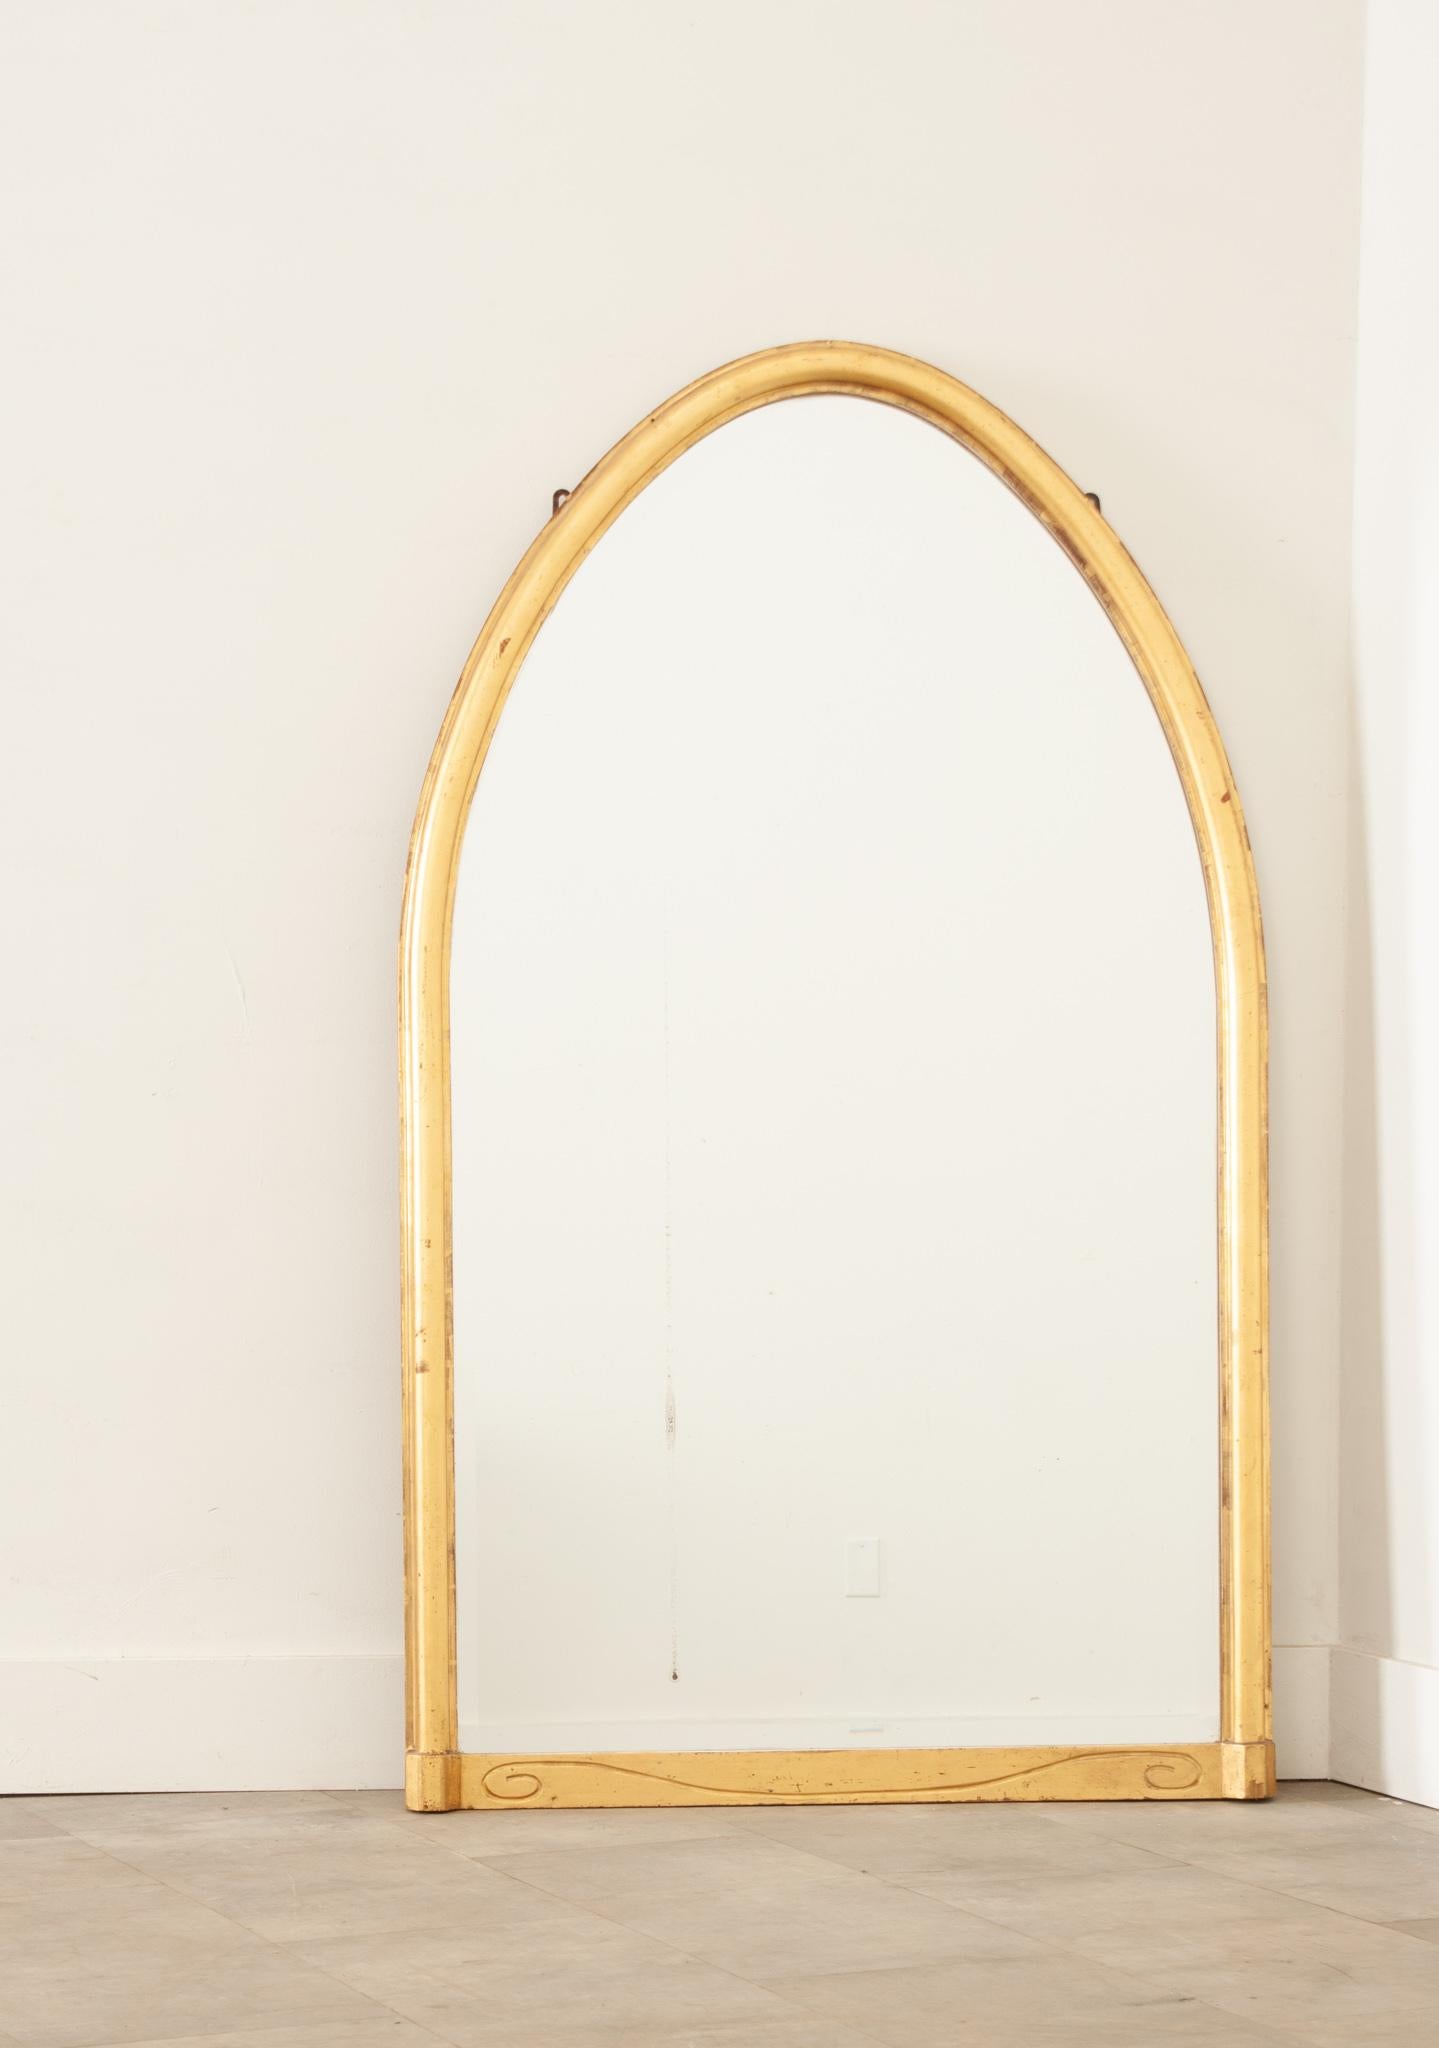 A fantastic gold gilt Art Nouveau mirror with the original beveled mirror plate. The gilt is in good condition with minimal wear. Below the mirror is a nicely carved C scroll detail. The mirror plate is in great condition with some minor